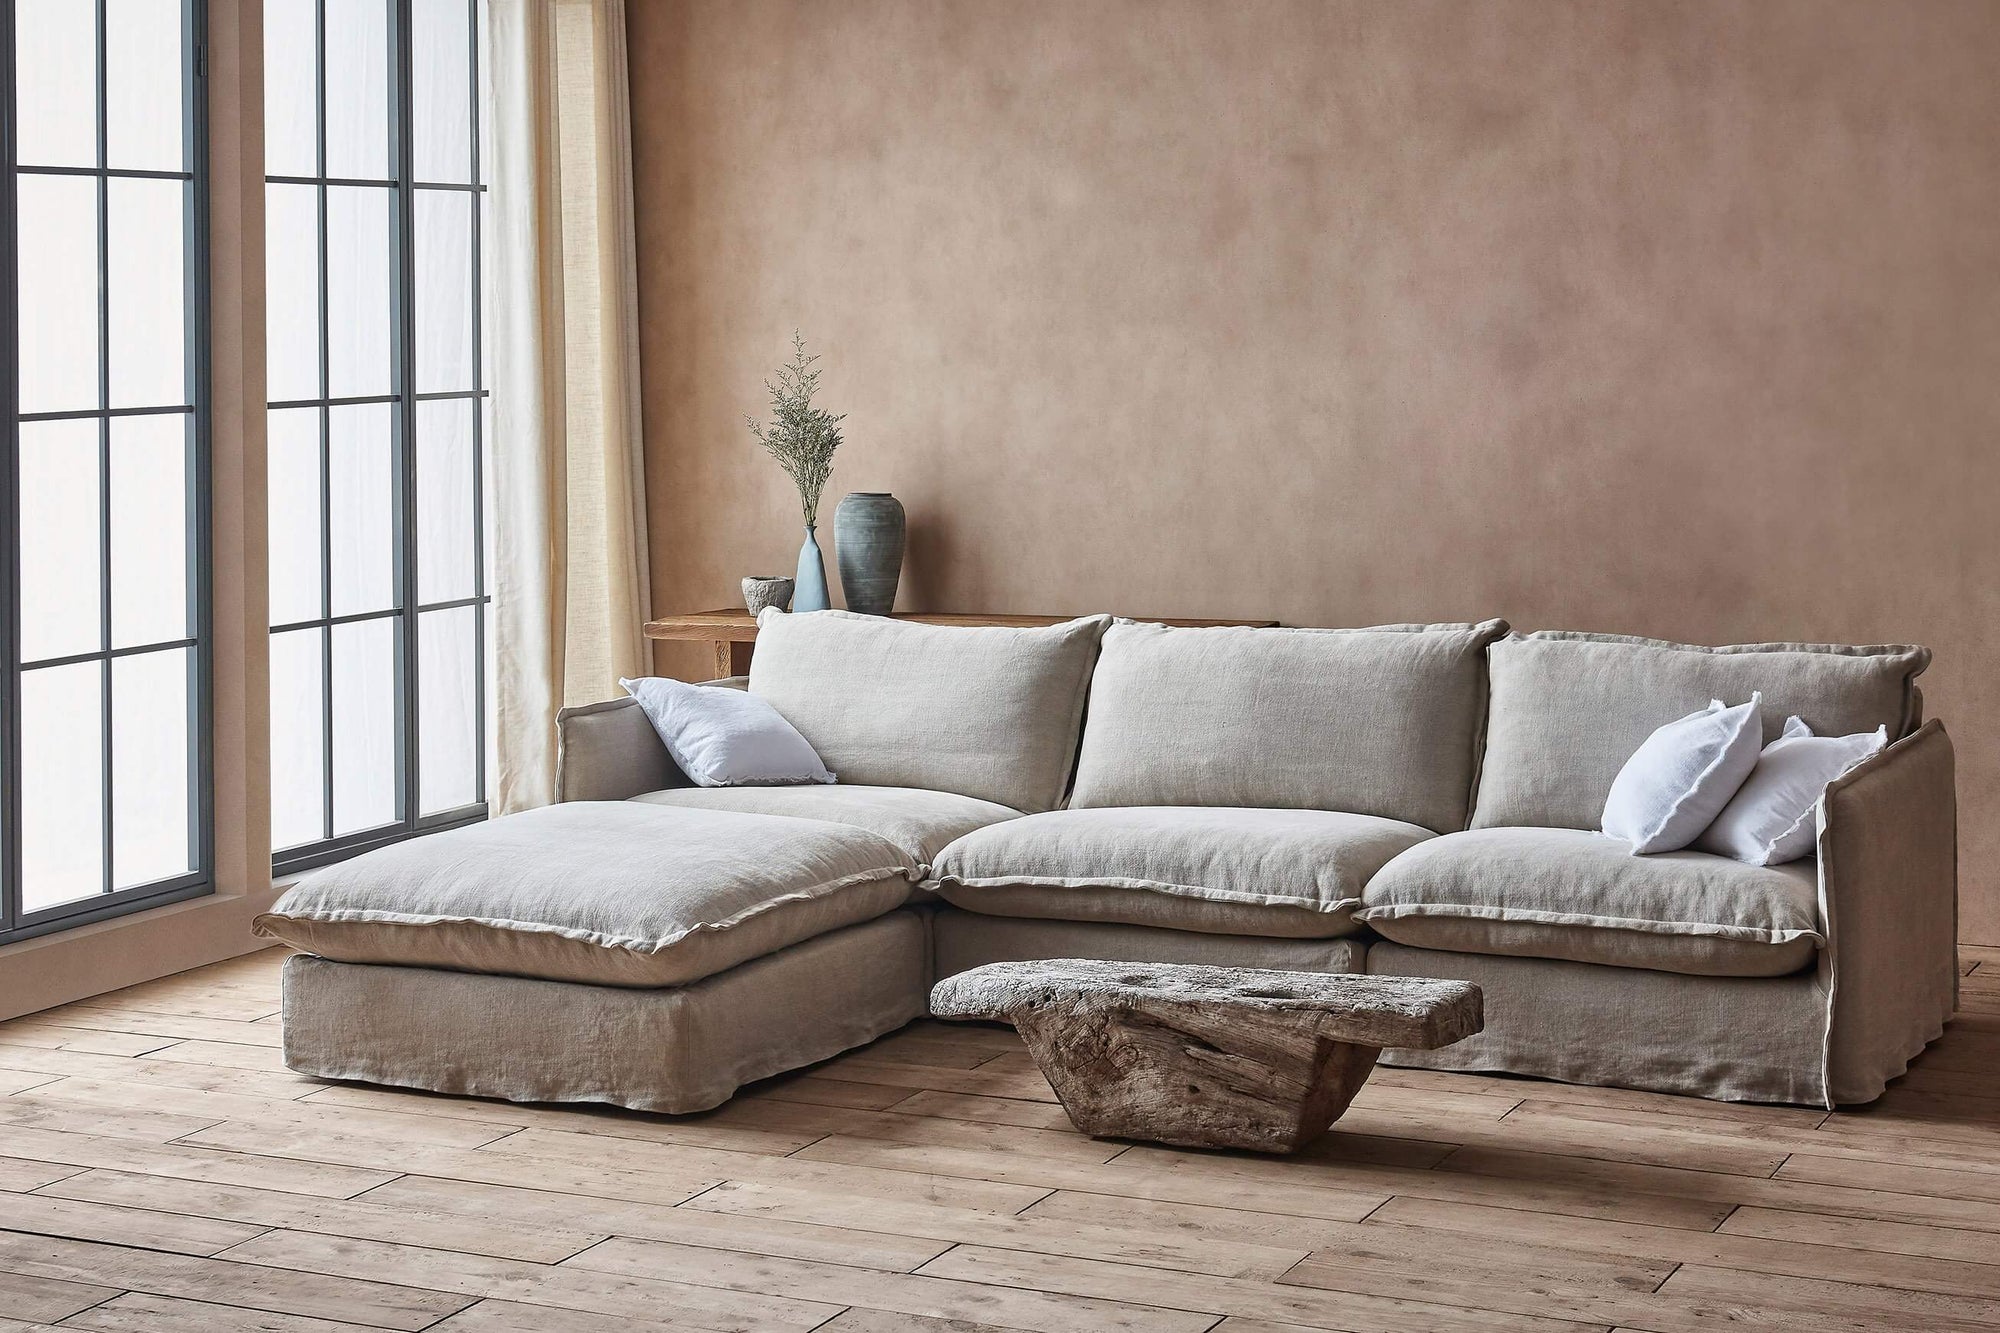 Neva 4-piece Chaise Sectional Sofa in Jasmine Rice, a light warm greige Medium Weight Linen, placed in a room next to a window and a coffee table